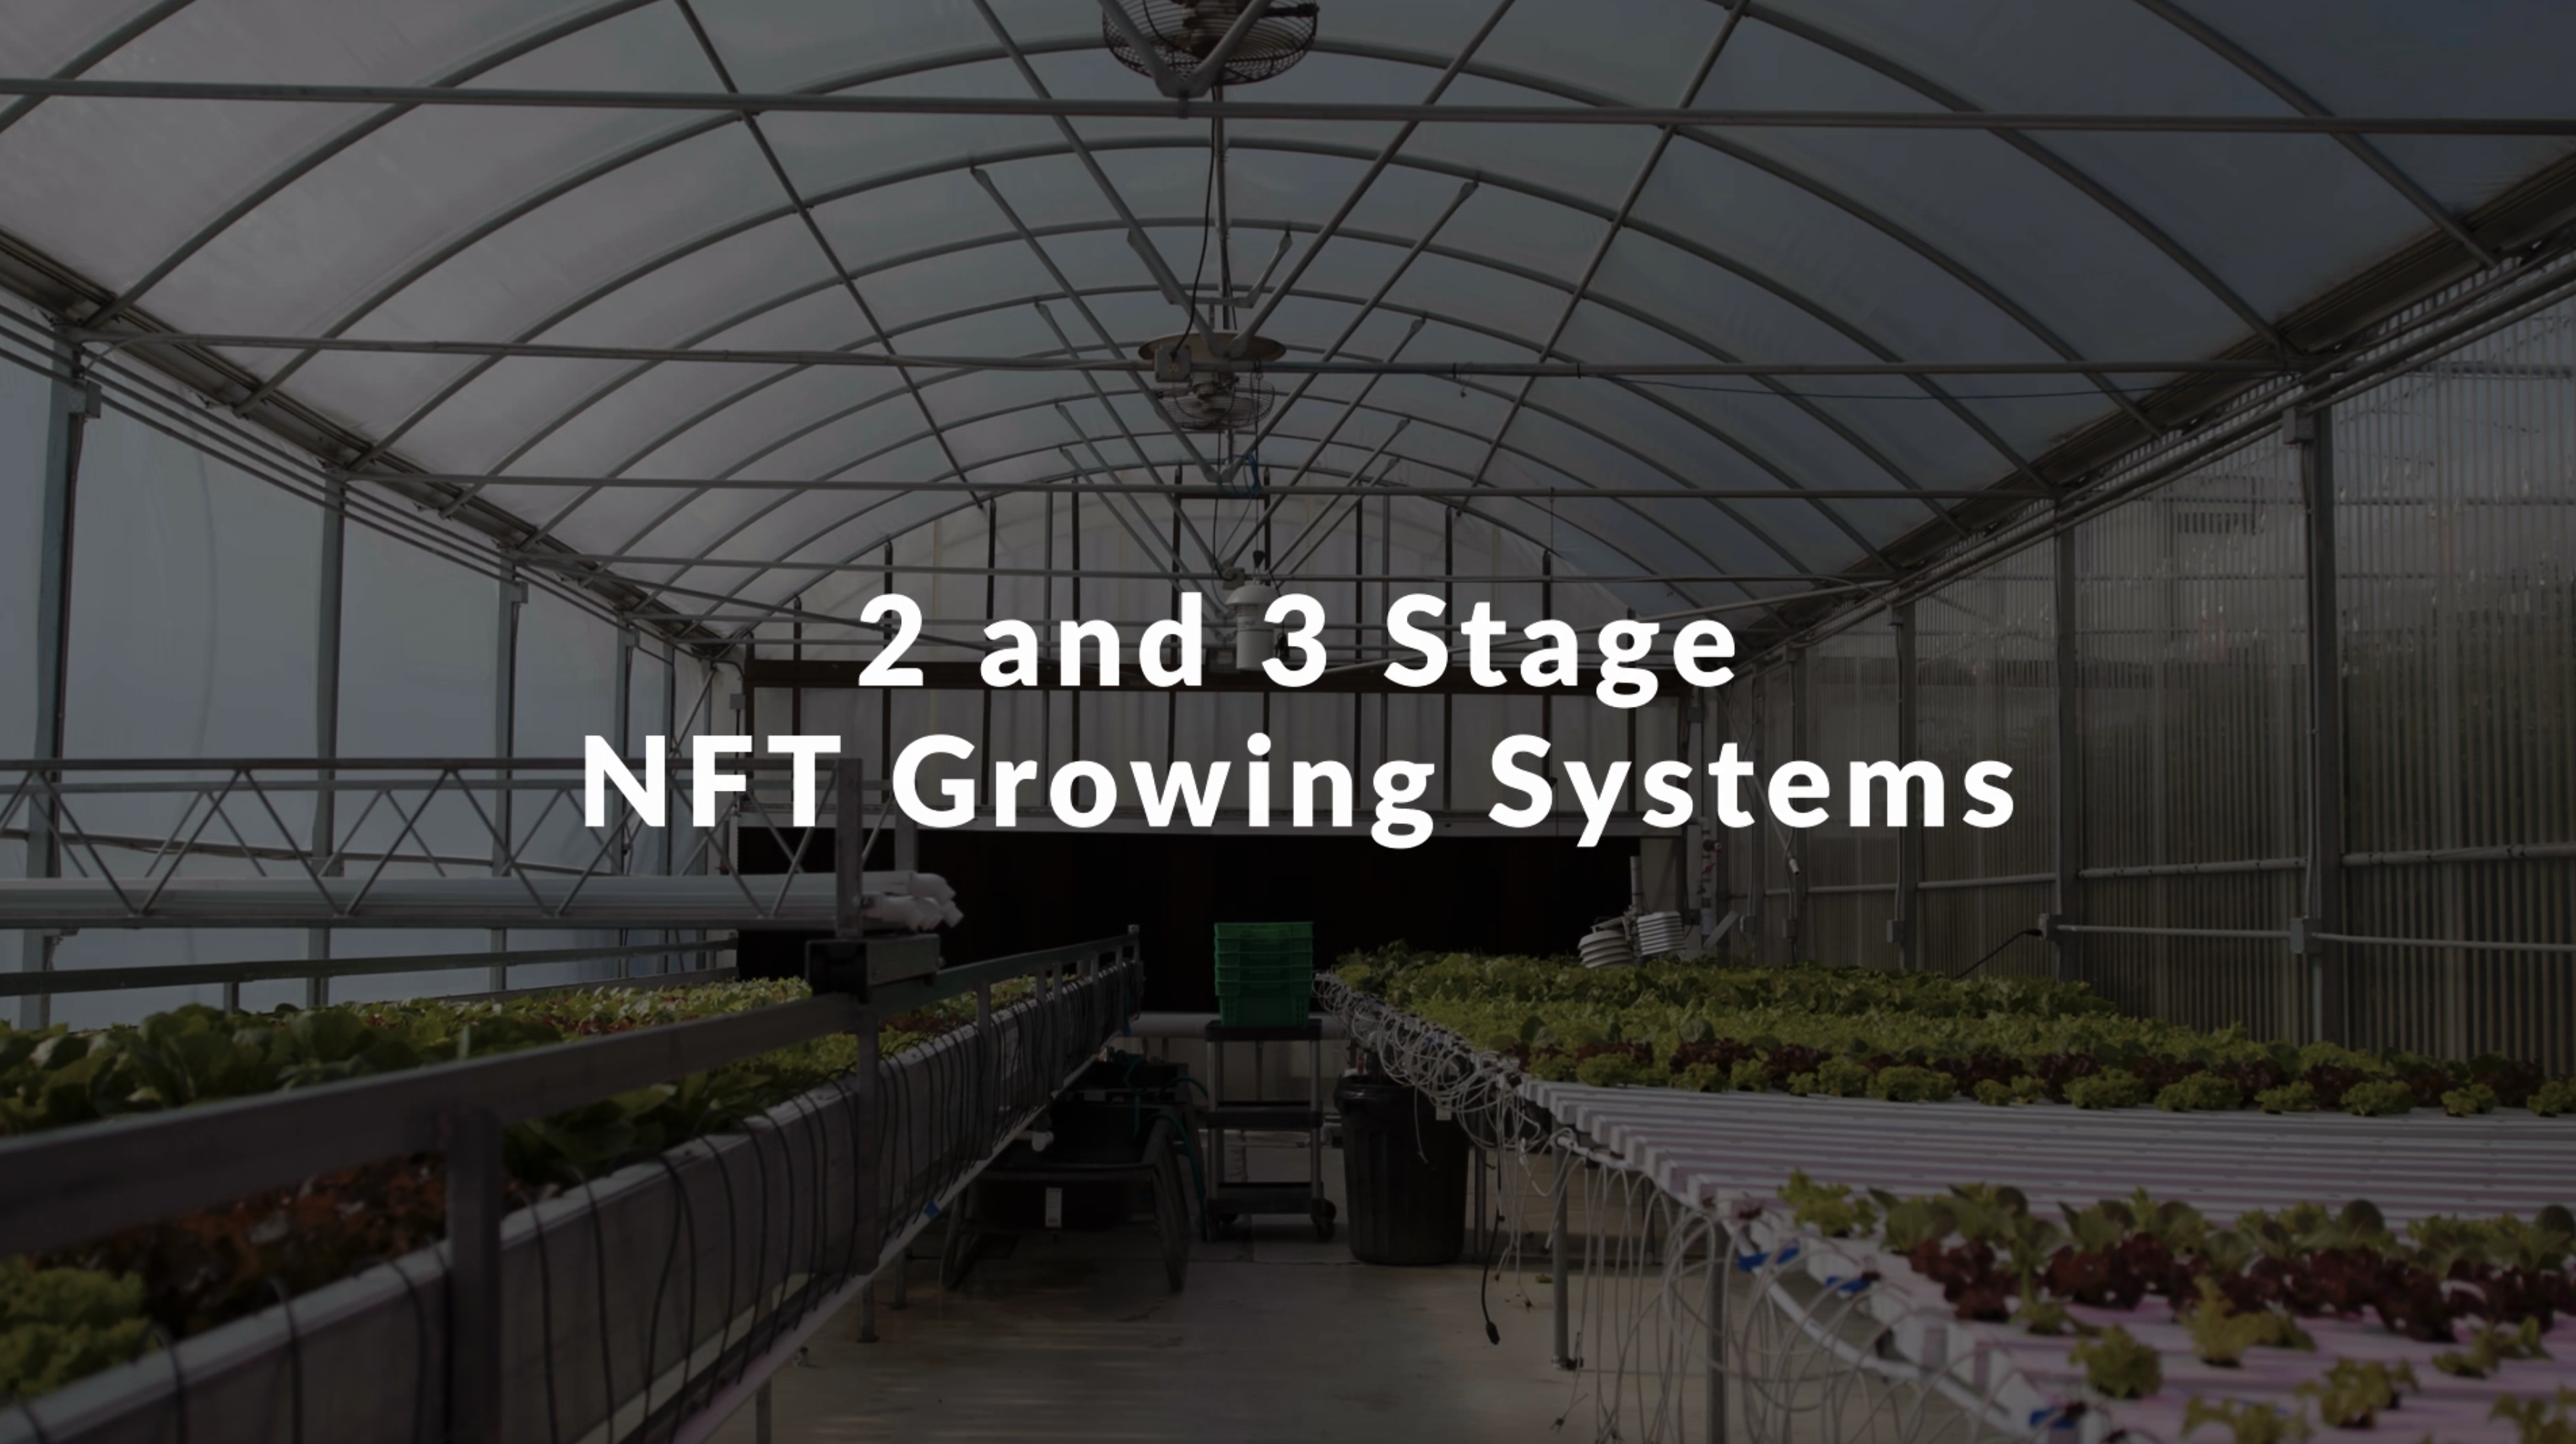 2 and 3 stage NFT Growing Systems